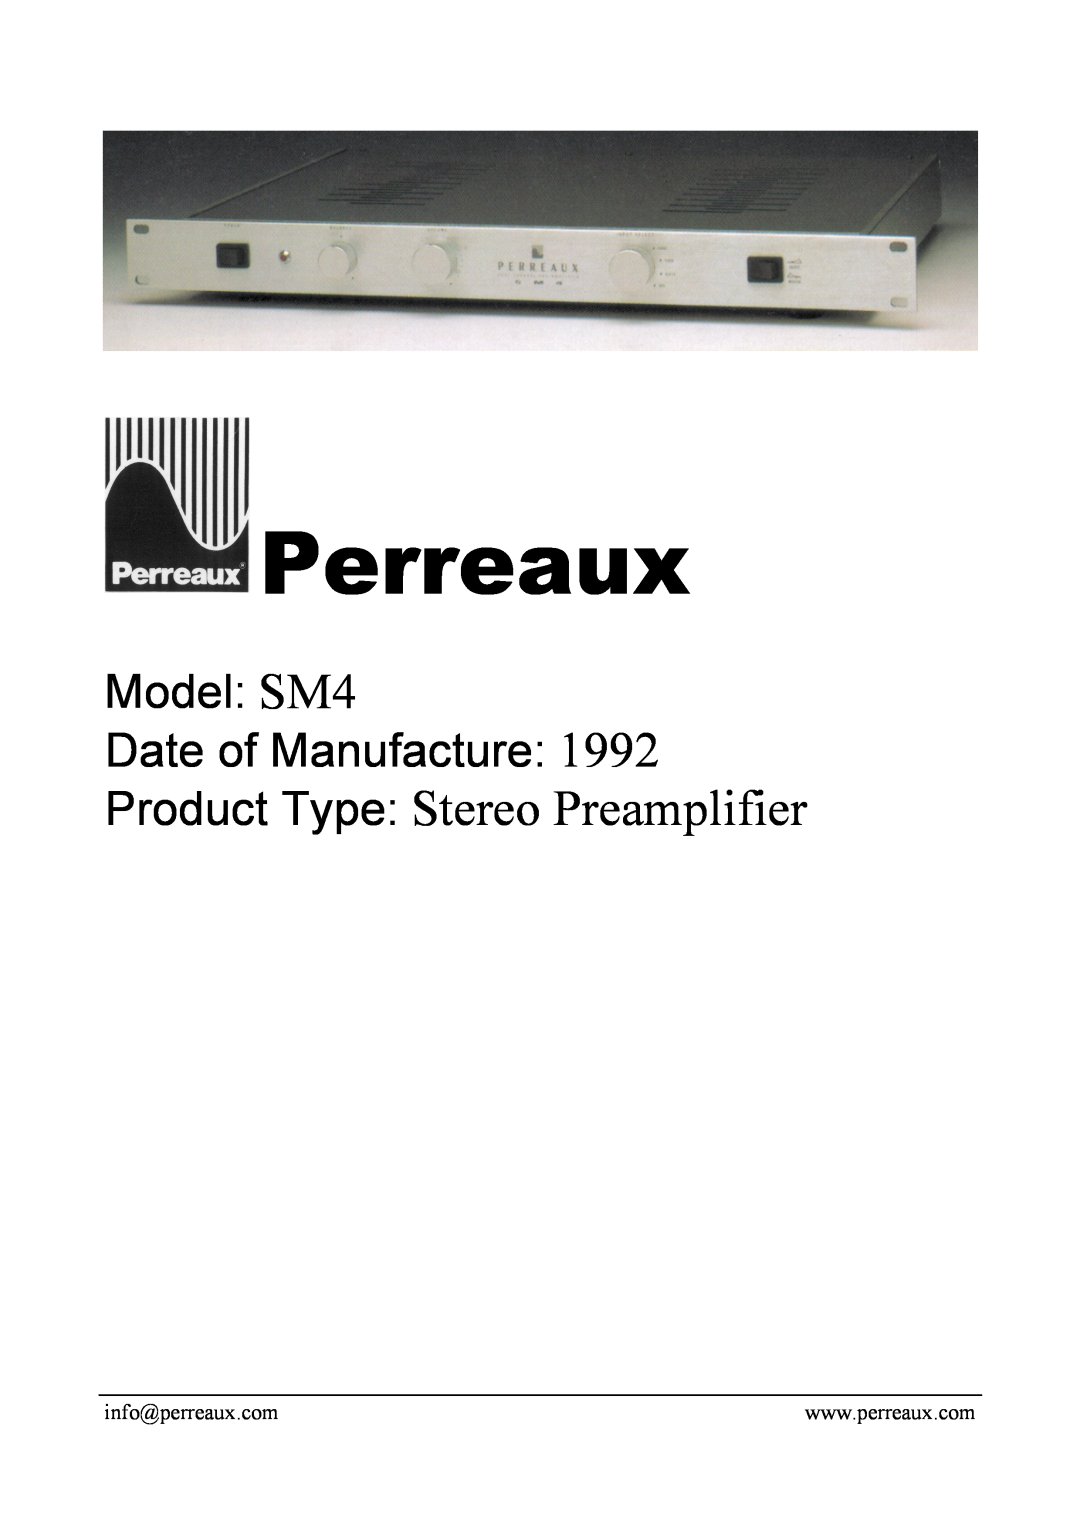 Perreaux manual Perreaux, Product Type Stereo Preamplifier, Model SM4 Date of Manufacture 